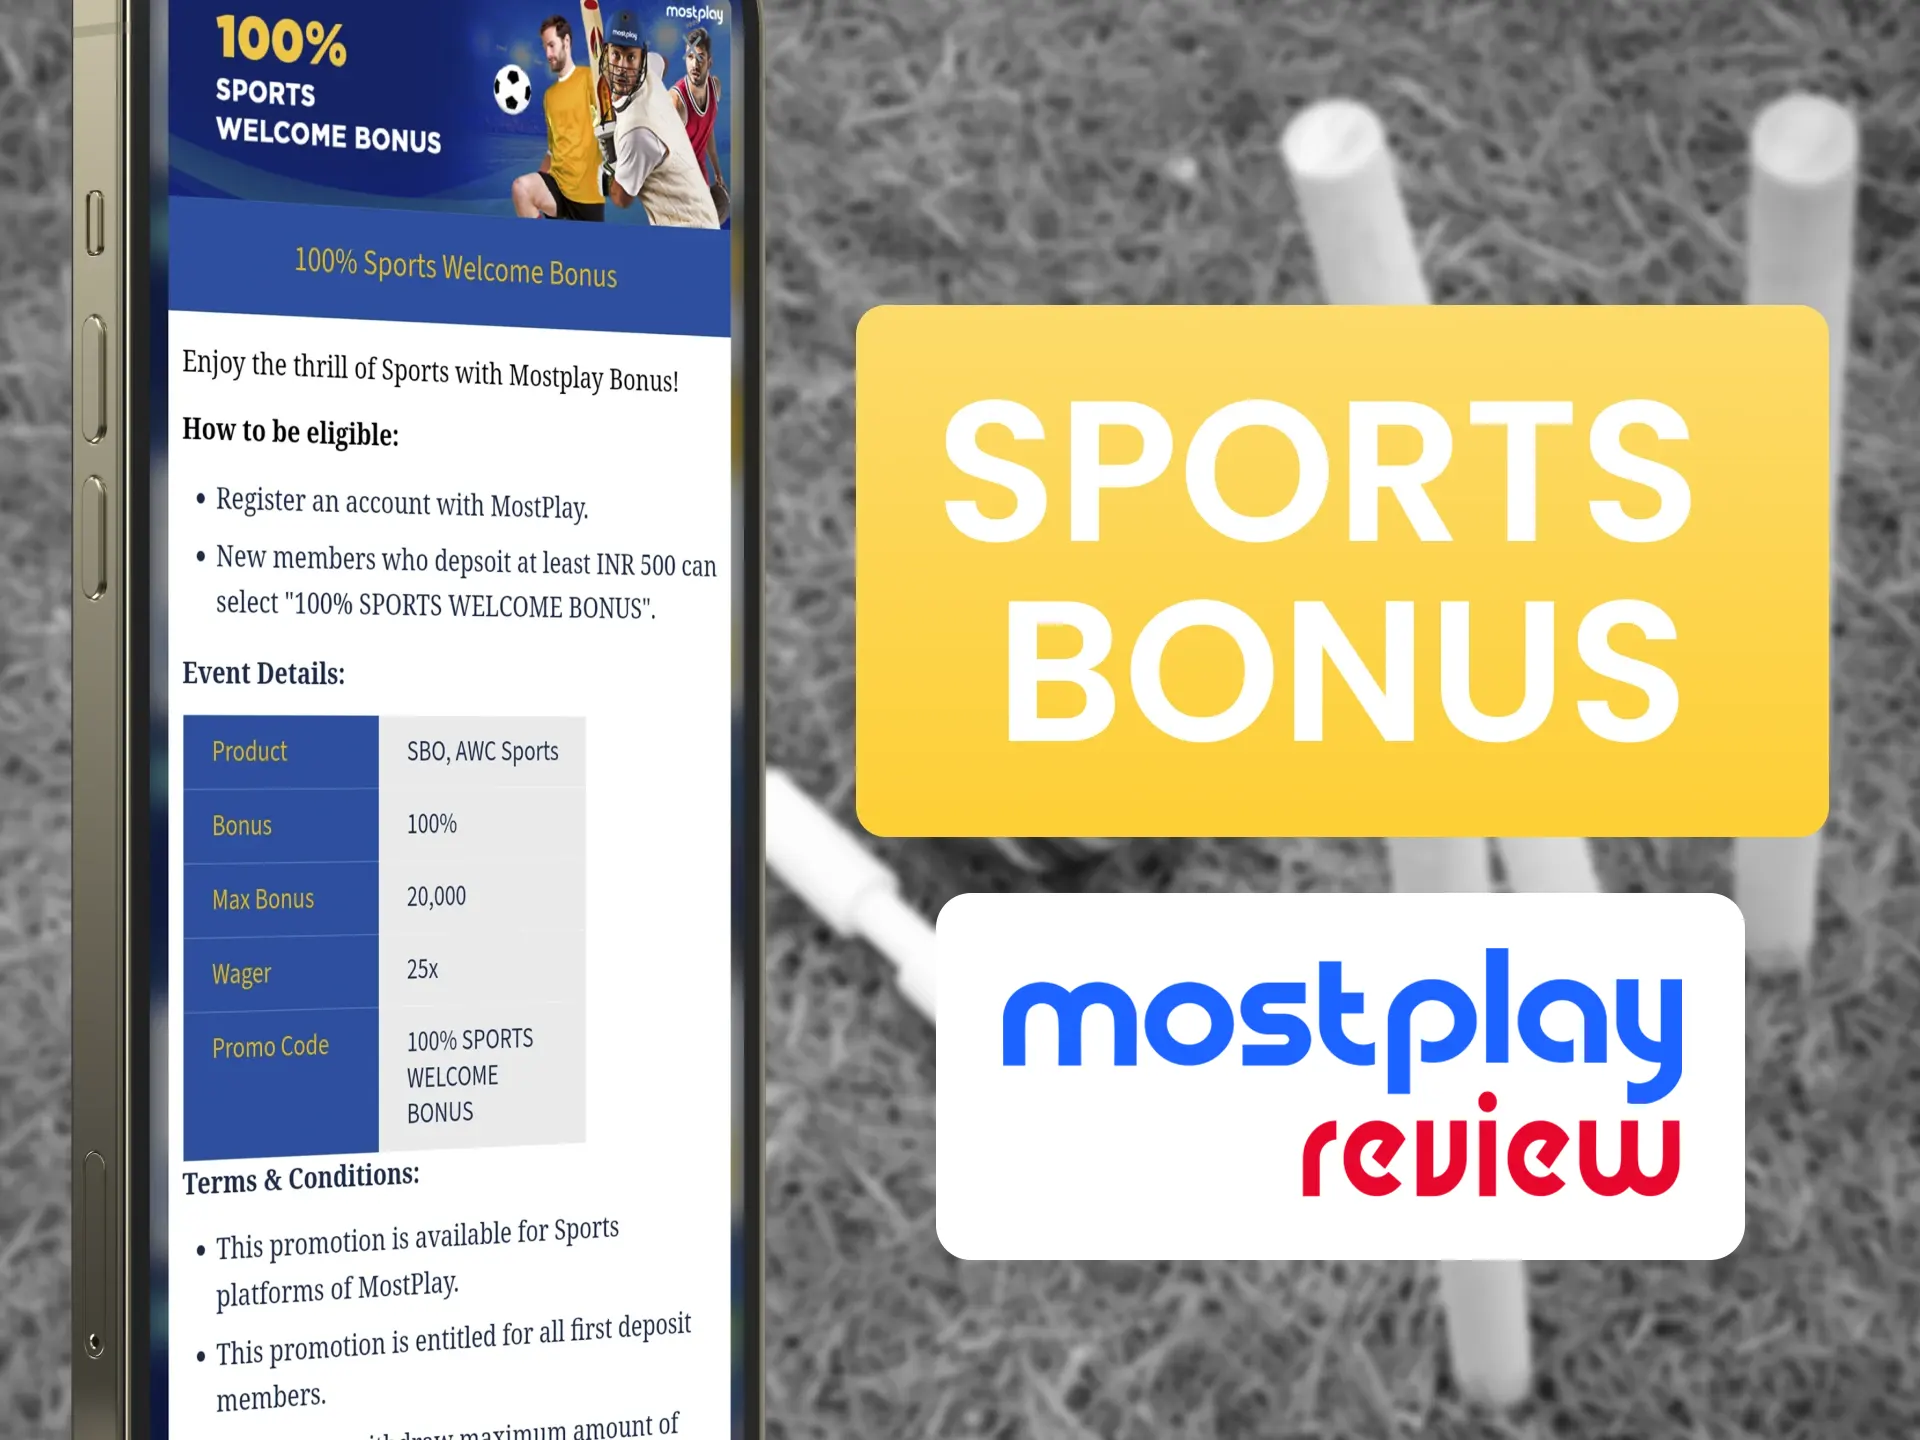 Get your Mostplay sports bonus by betting on sports.